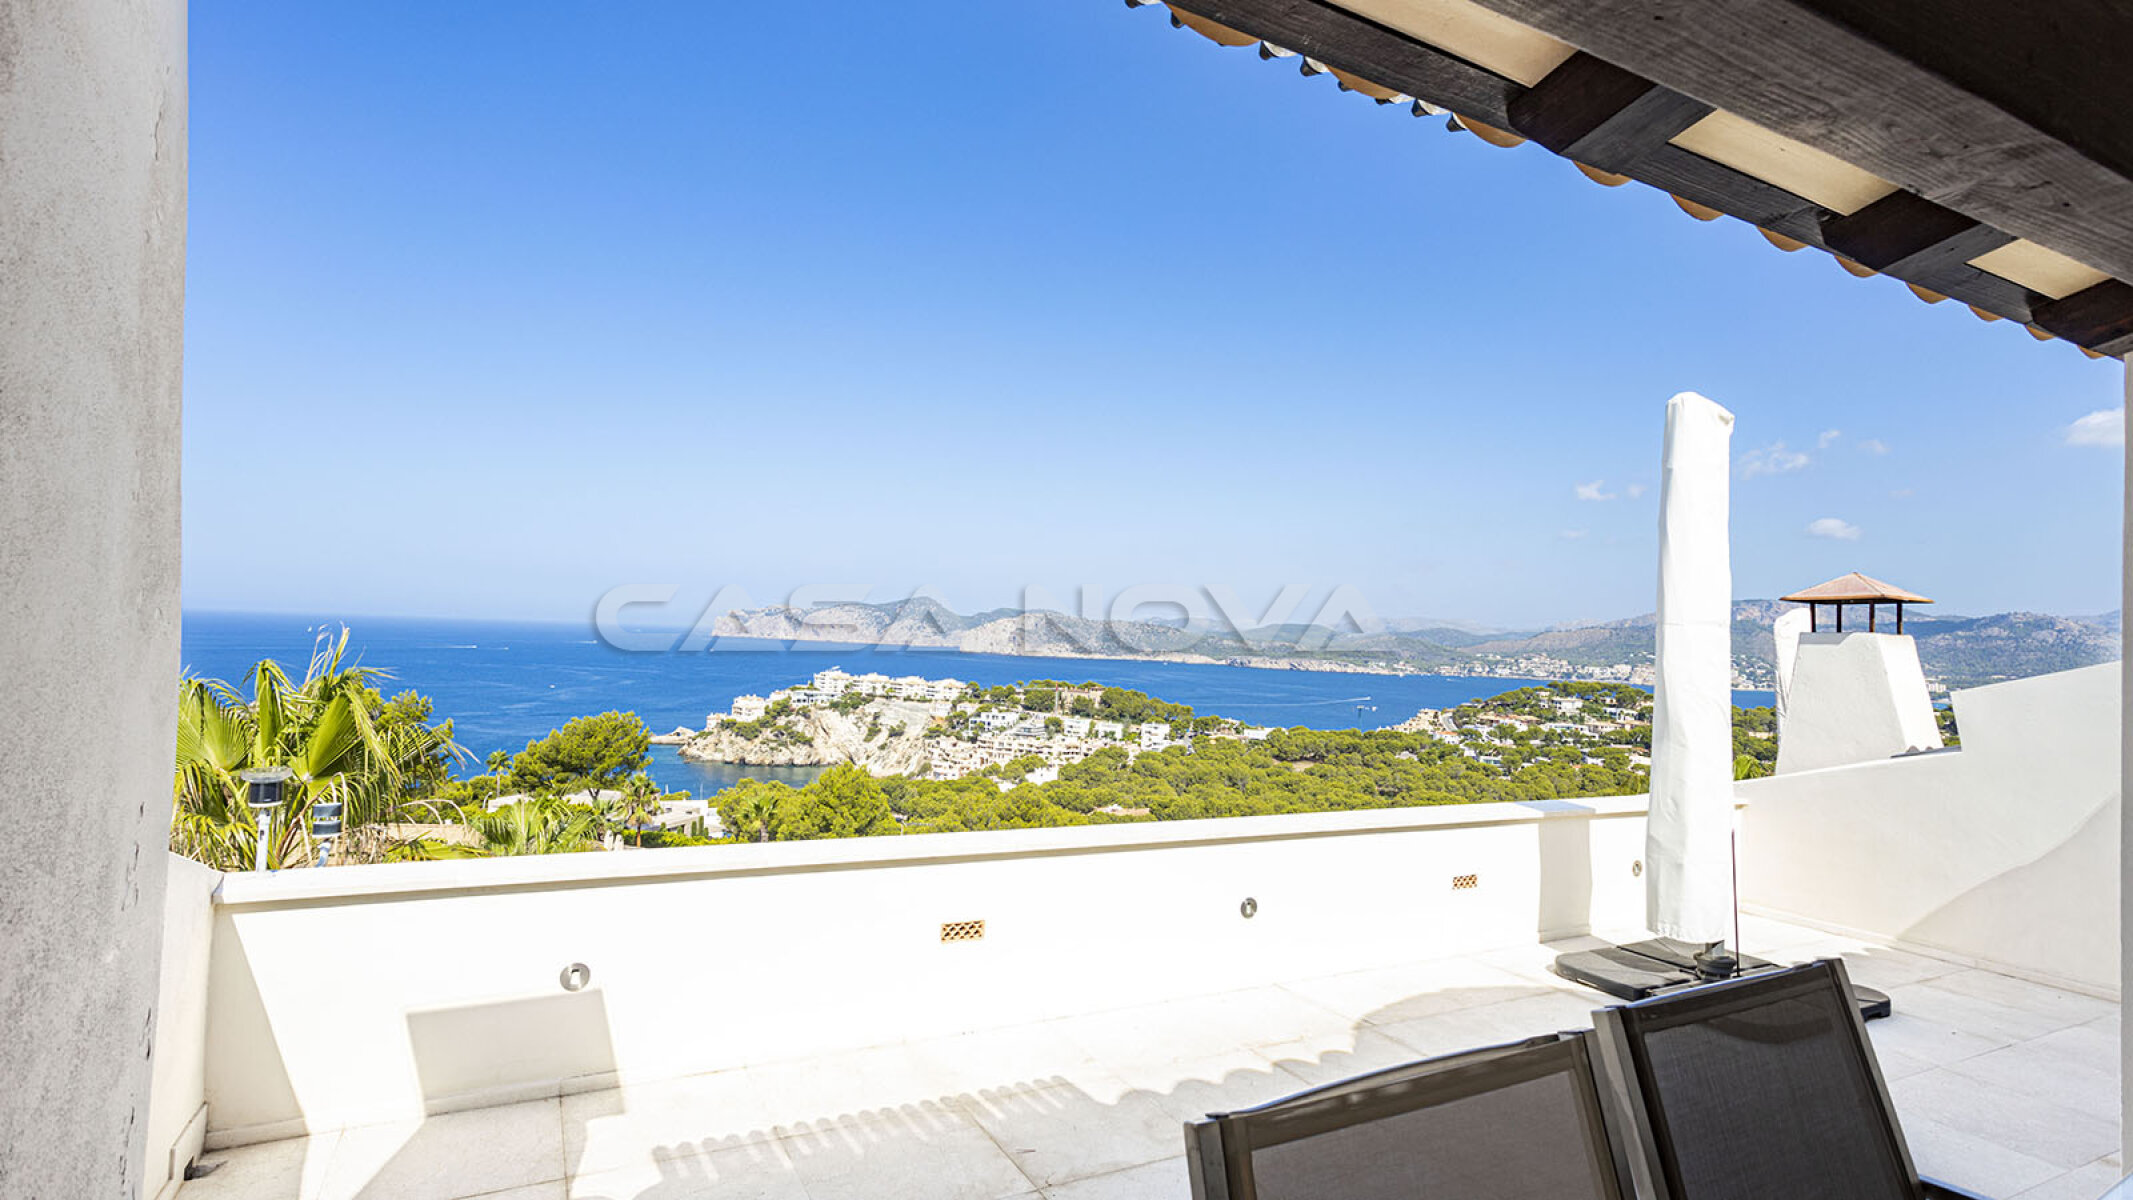 Beautiful views of the Mediterranean Sea from the Mallorca property